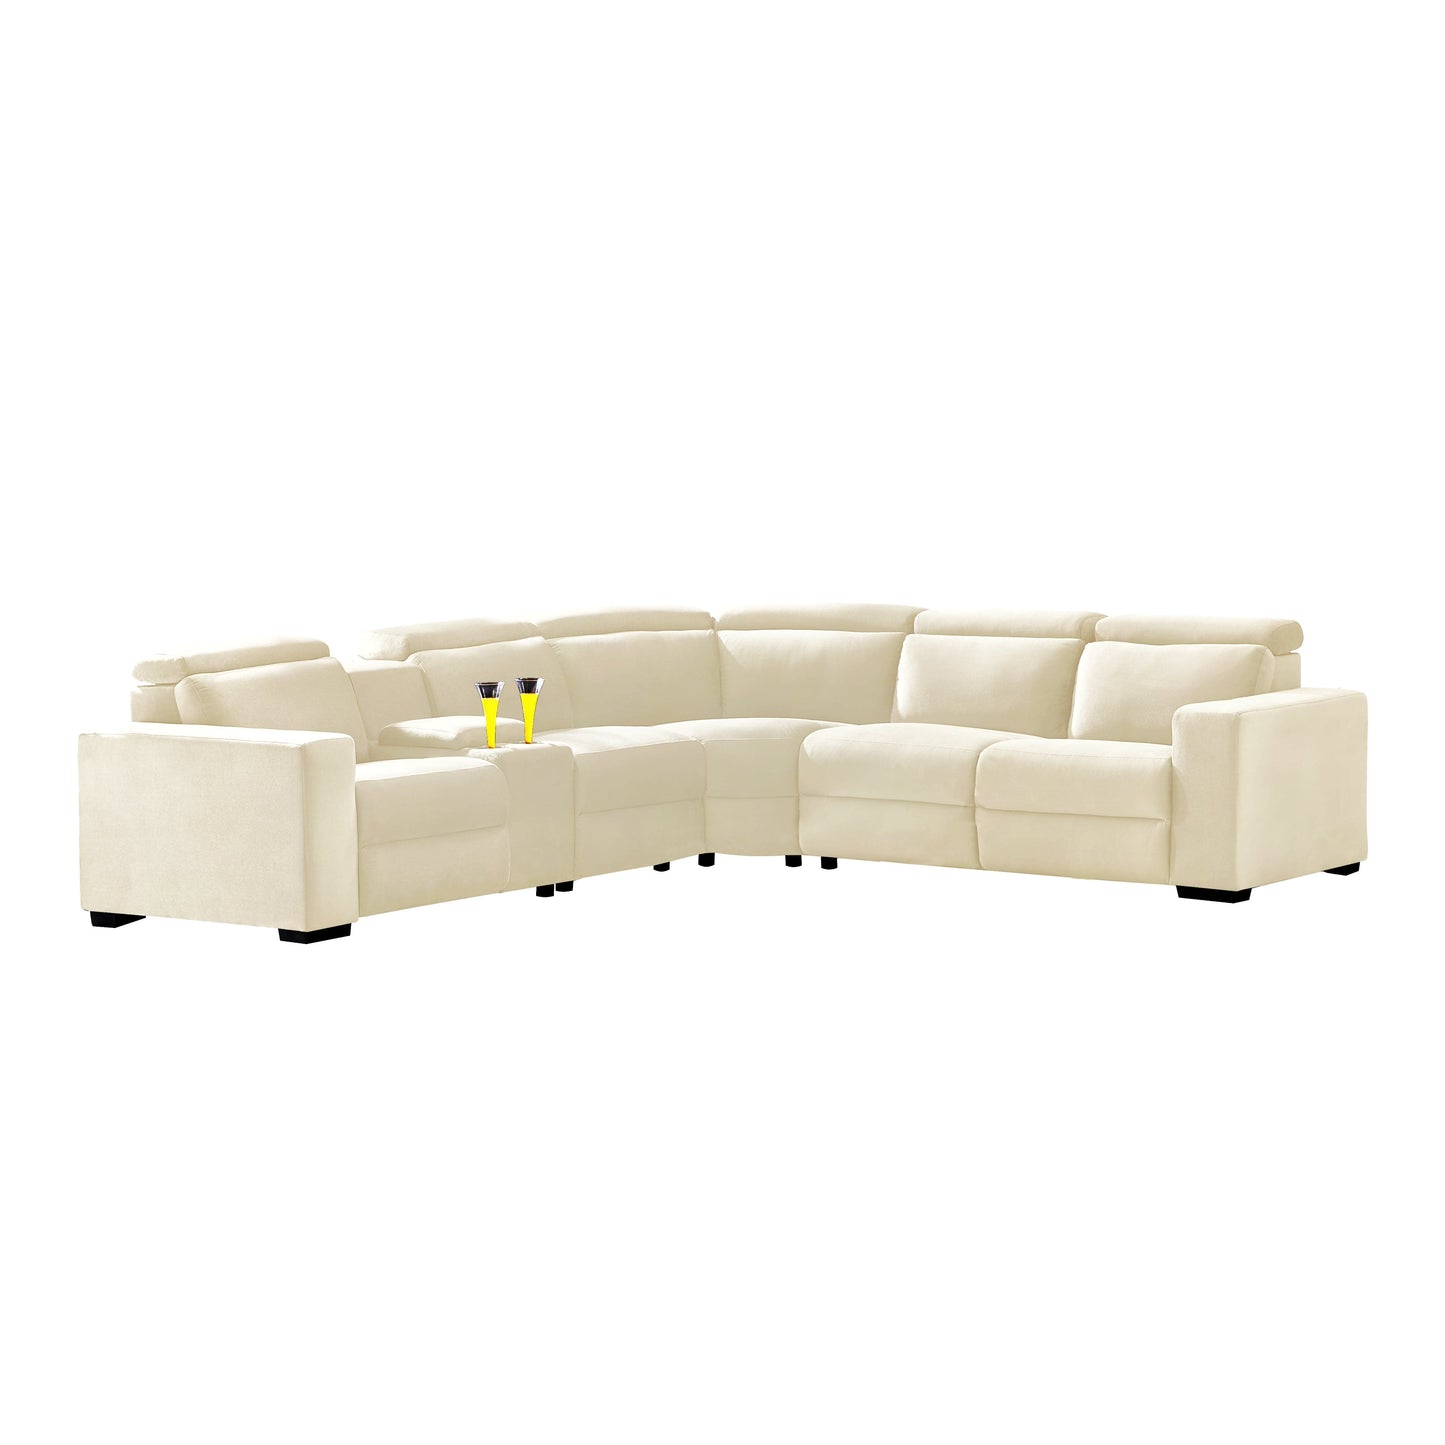 TFC&H Co. Electric Recliner Sectional Living Room Set - Beige- Ships from The US - sectional at TFC&H Co.